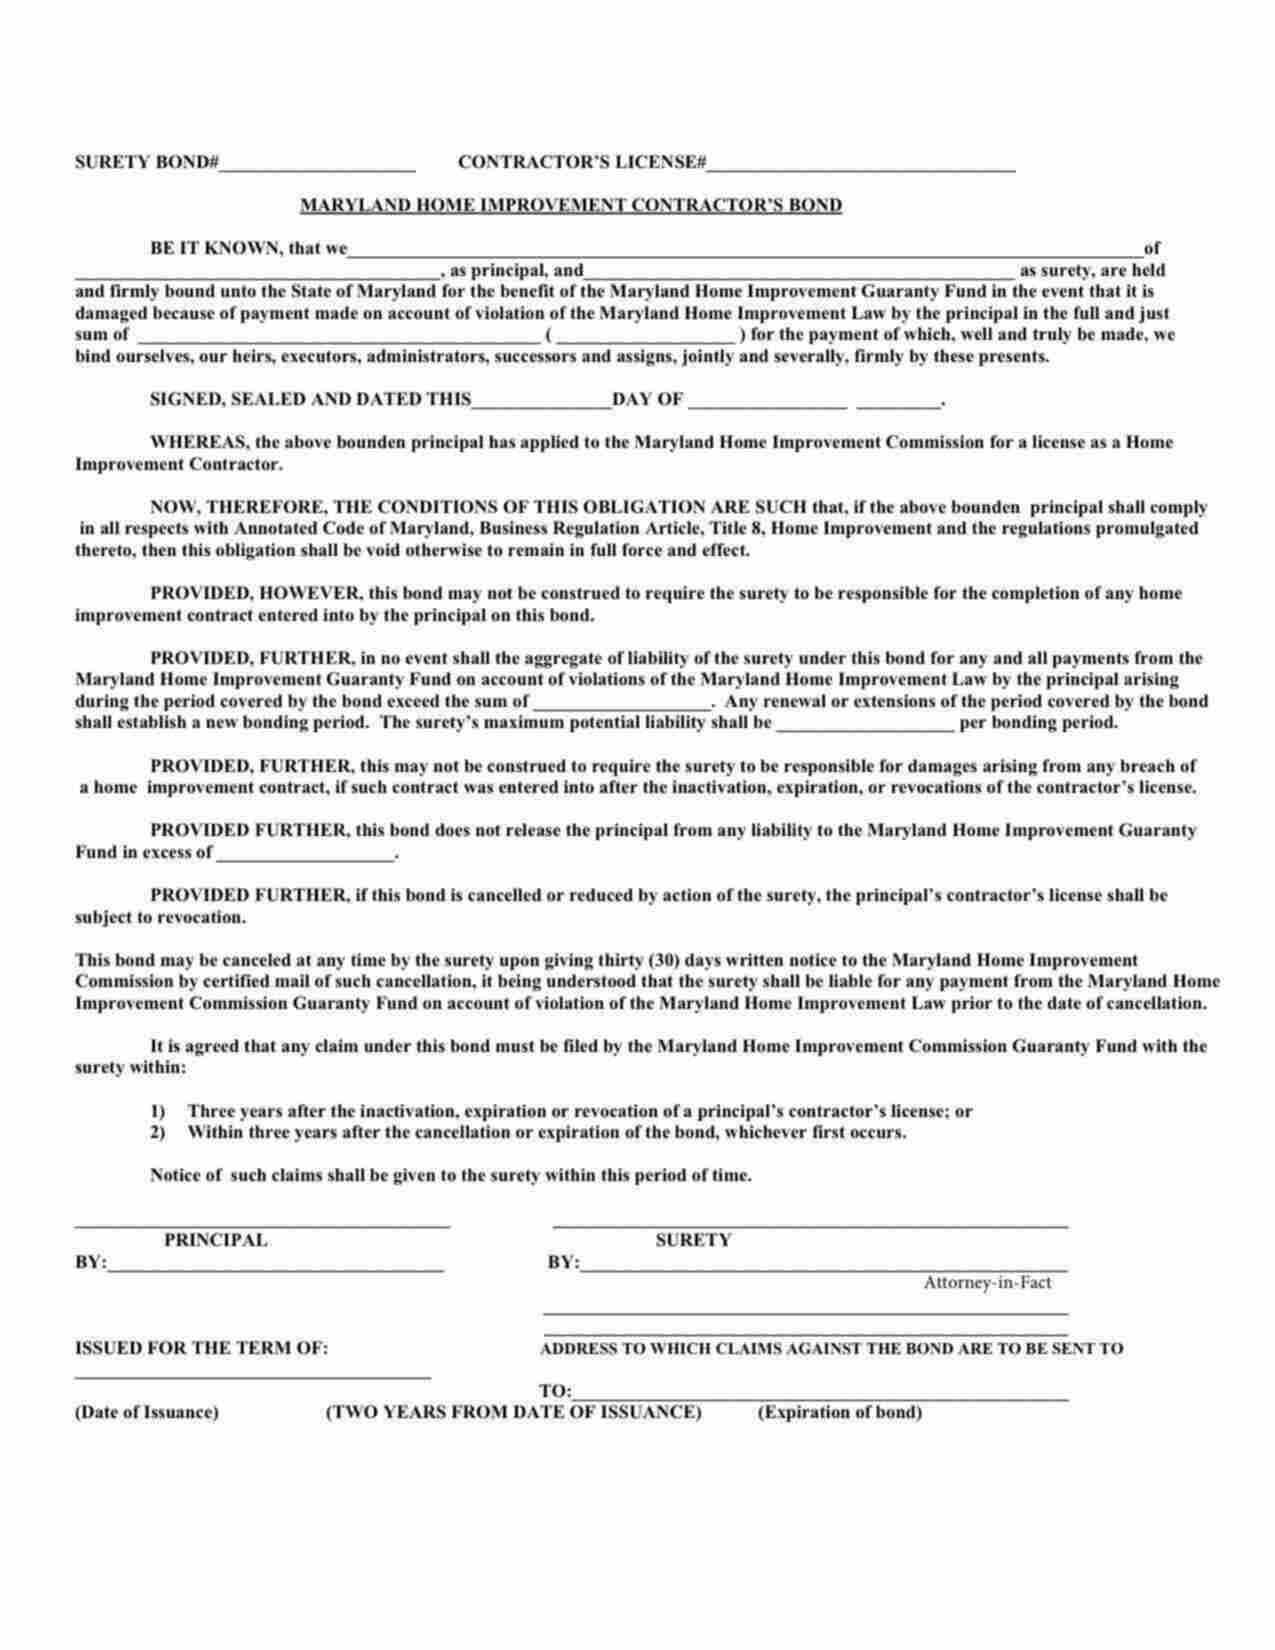 Maryland Home Improvement Contractor Bond Form